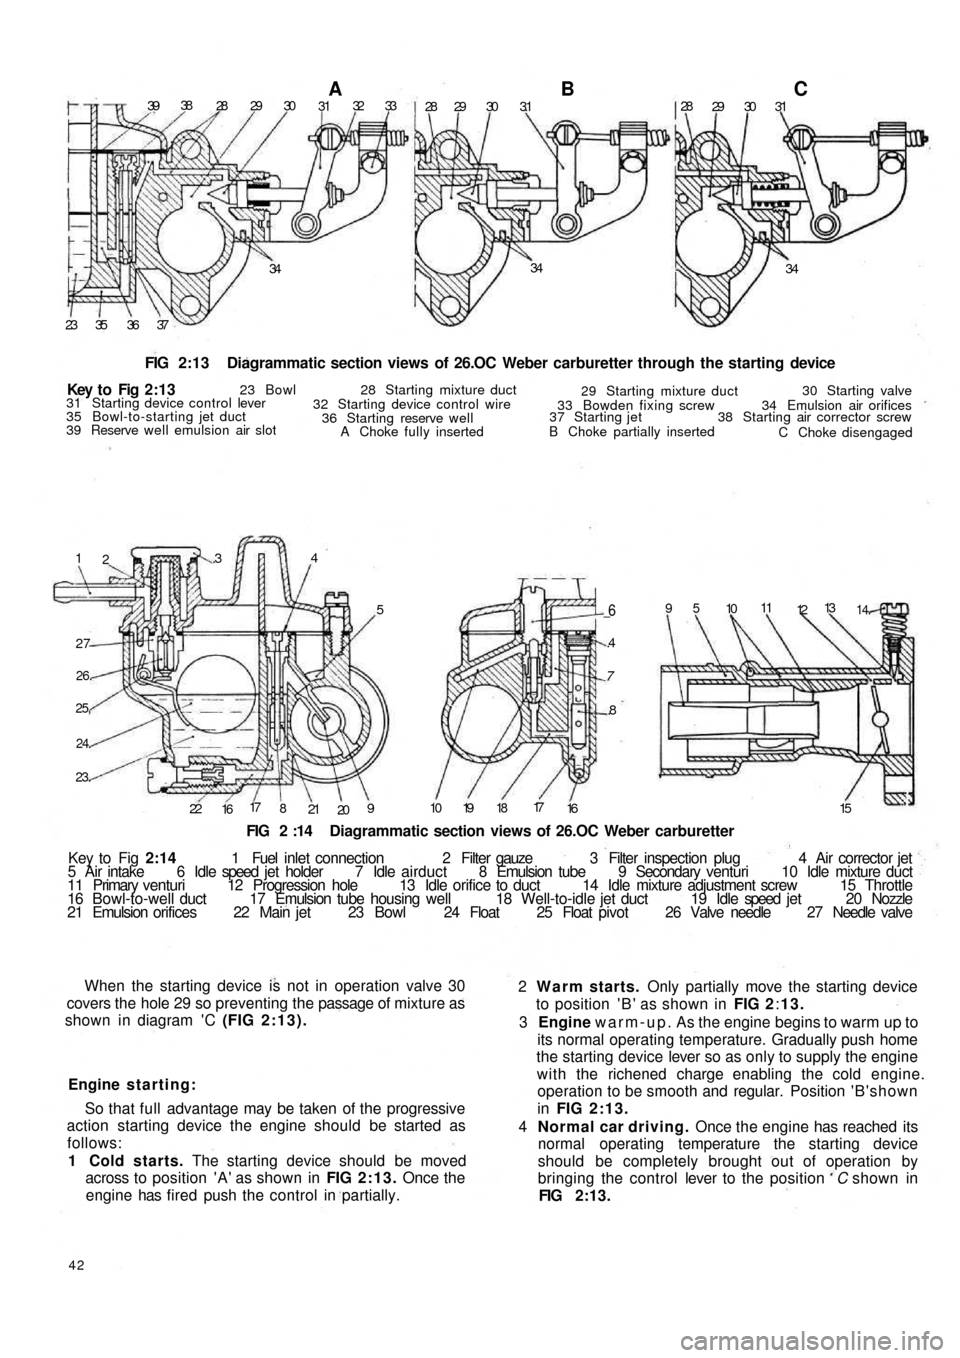 FIAT 500 1969 1.G Workshop Manual 3938
28 29 30A3132 33
28 29 30 3.1B28
29 30 31C
34 34
34
37 36 35 23
FIG 2:13  Diagrammatic section views of 26.OC Weber carburetter through the starting device
1
2.34
5
27
26.
25,
24.
23.
22
1617
8
2